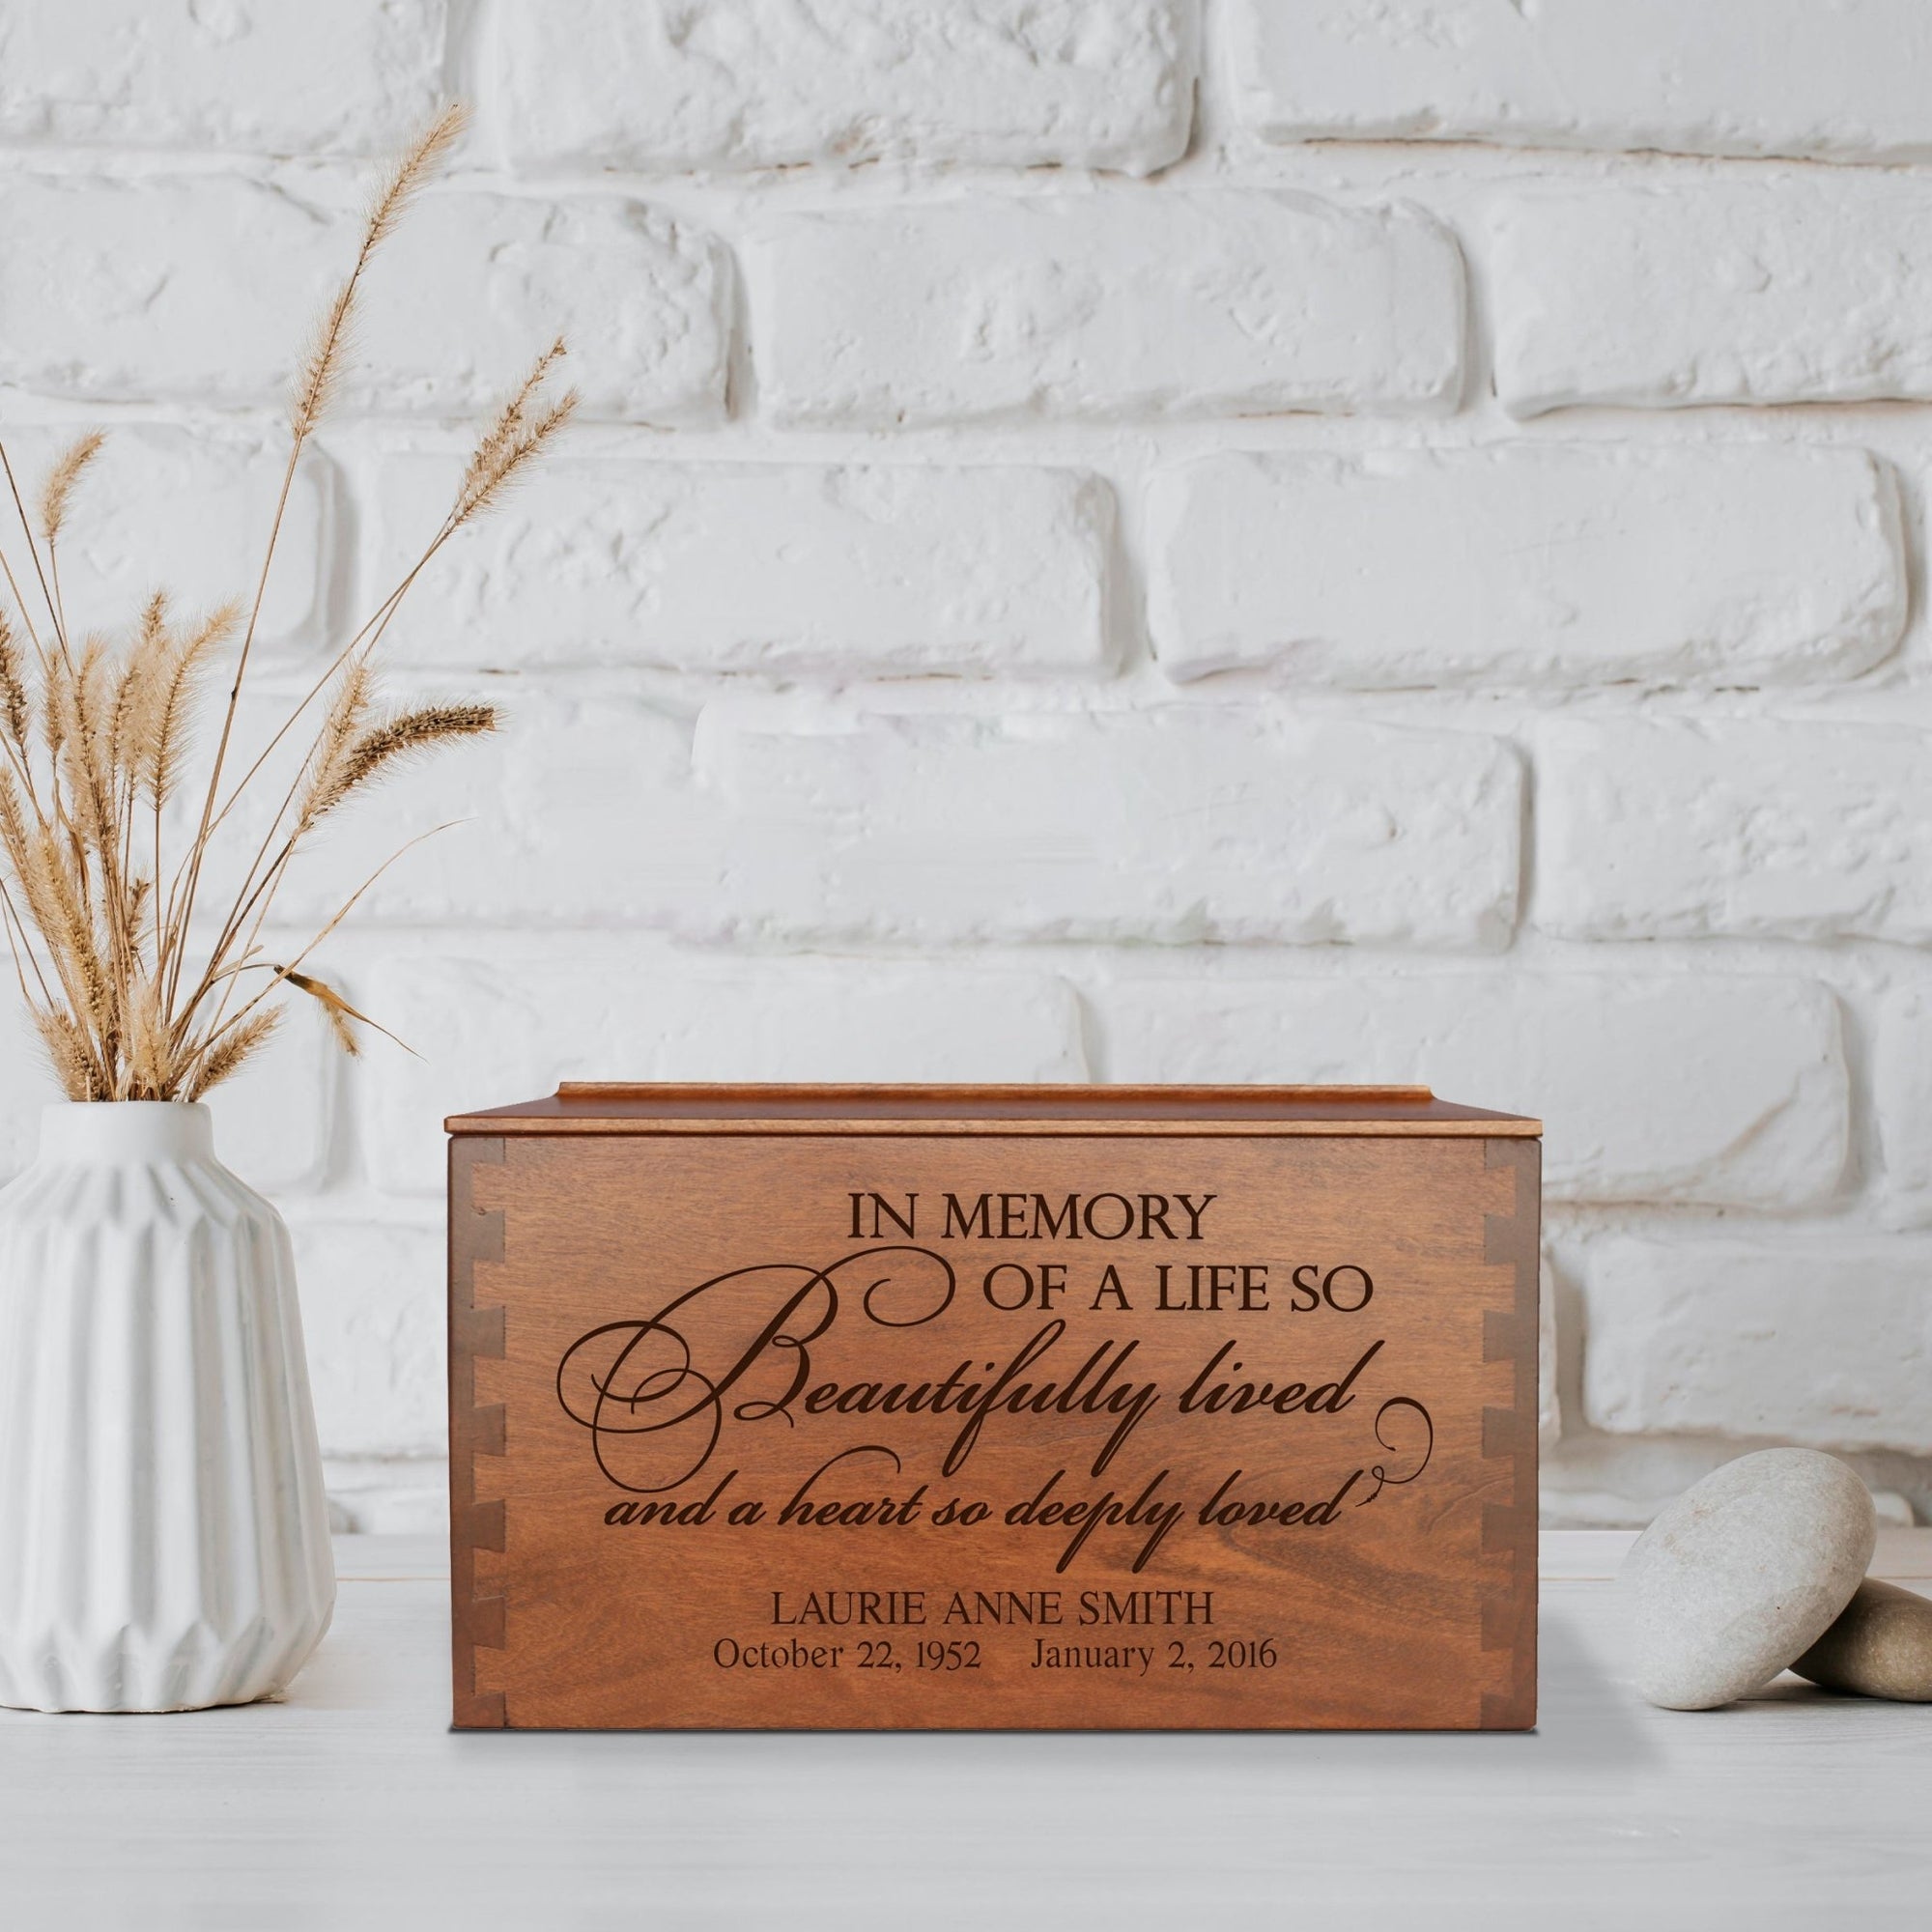 In Memory Of Life Personalized Memorial Decorative Dovetail Cremation Urn For Human Ashes Funeral and Condolence Keepsake - LifeSong Milestones